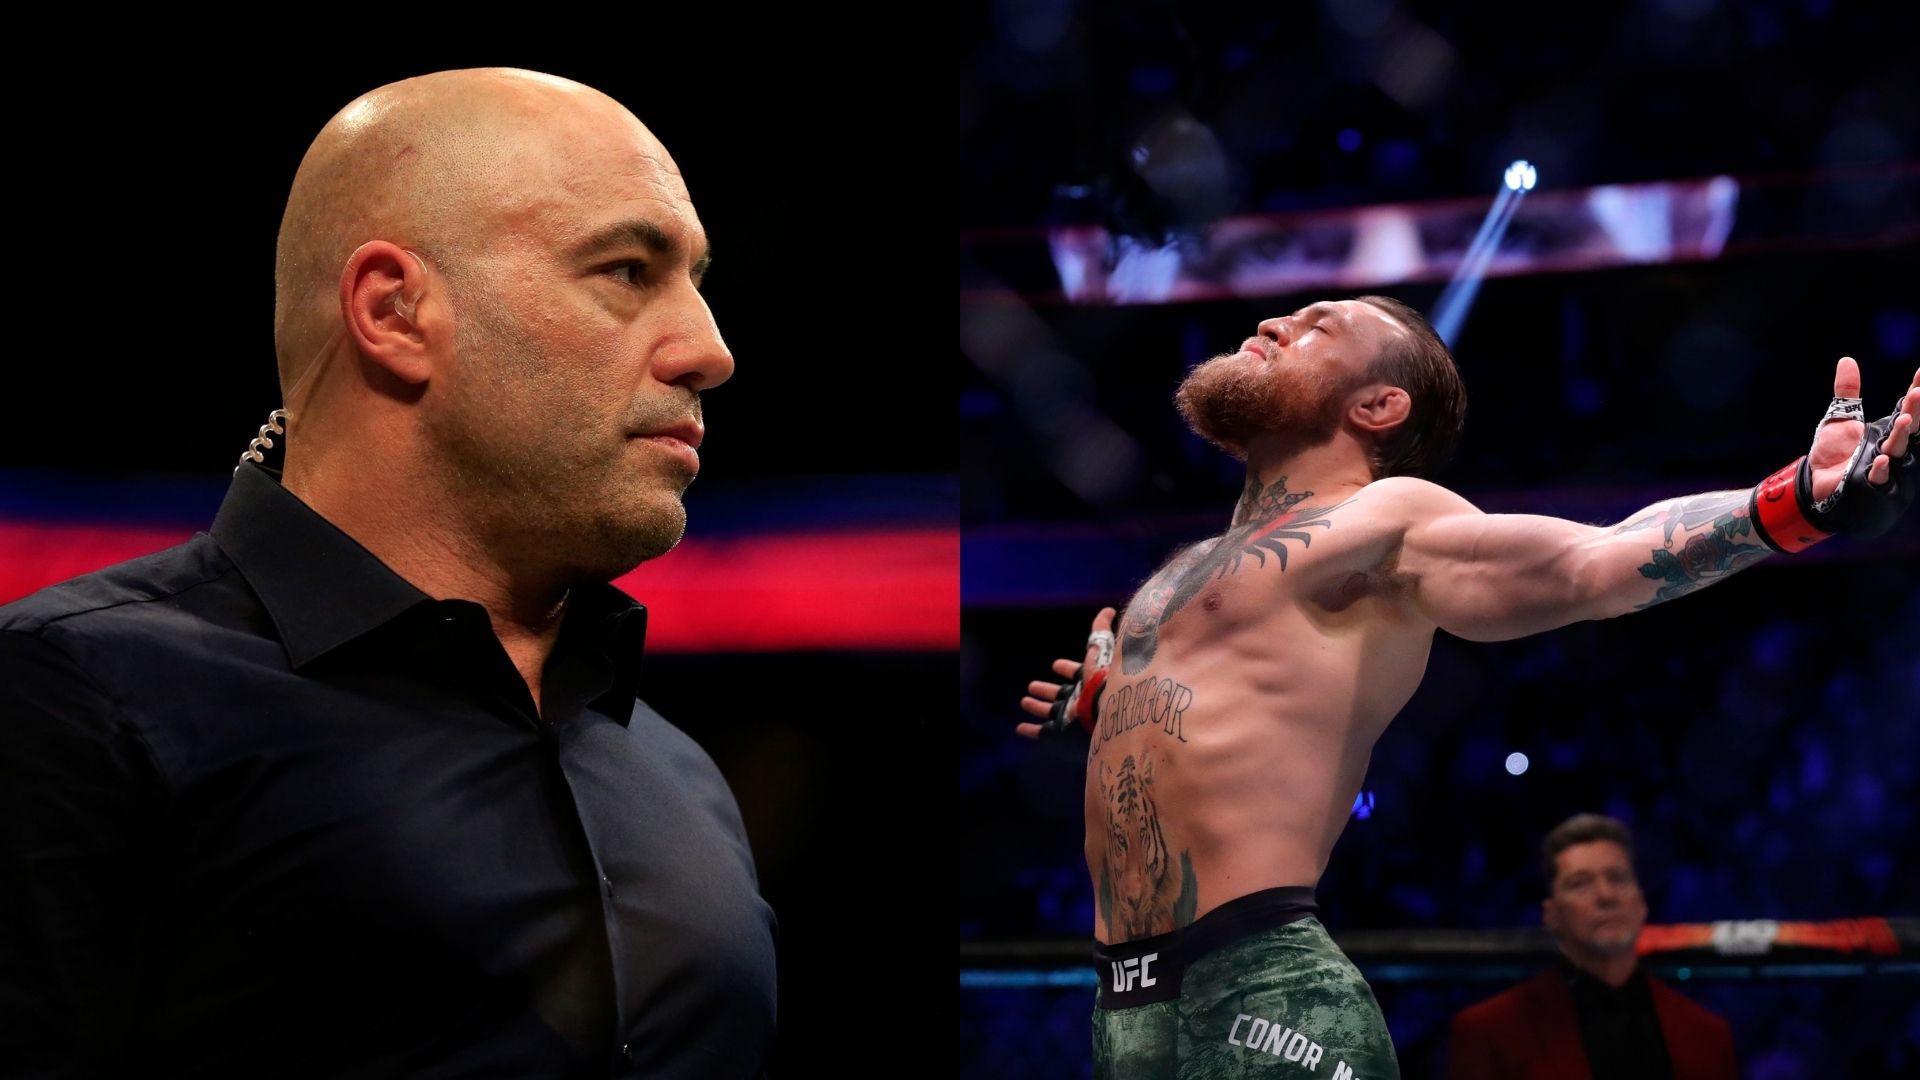 Joe Rogan believes a trilogy with Nate Diaz would be something special